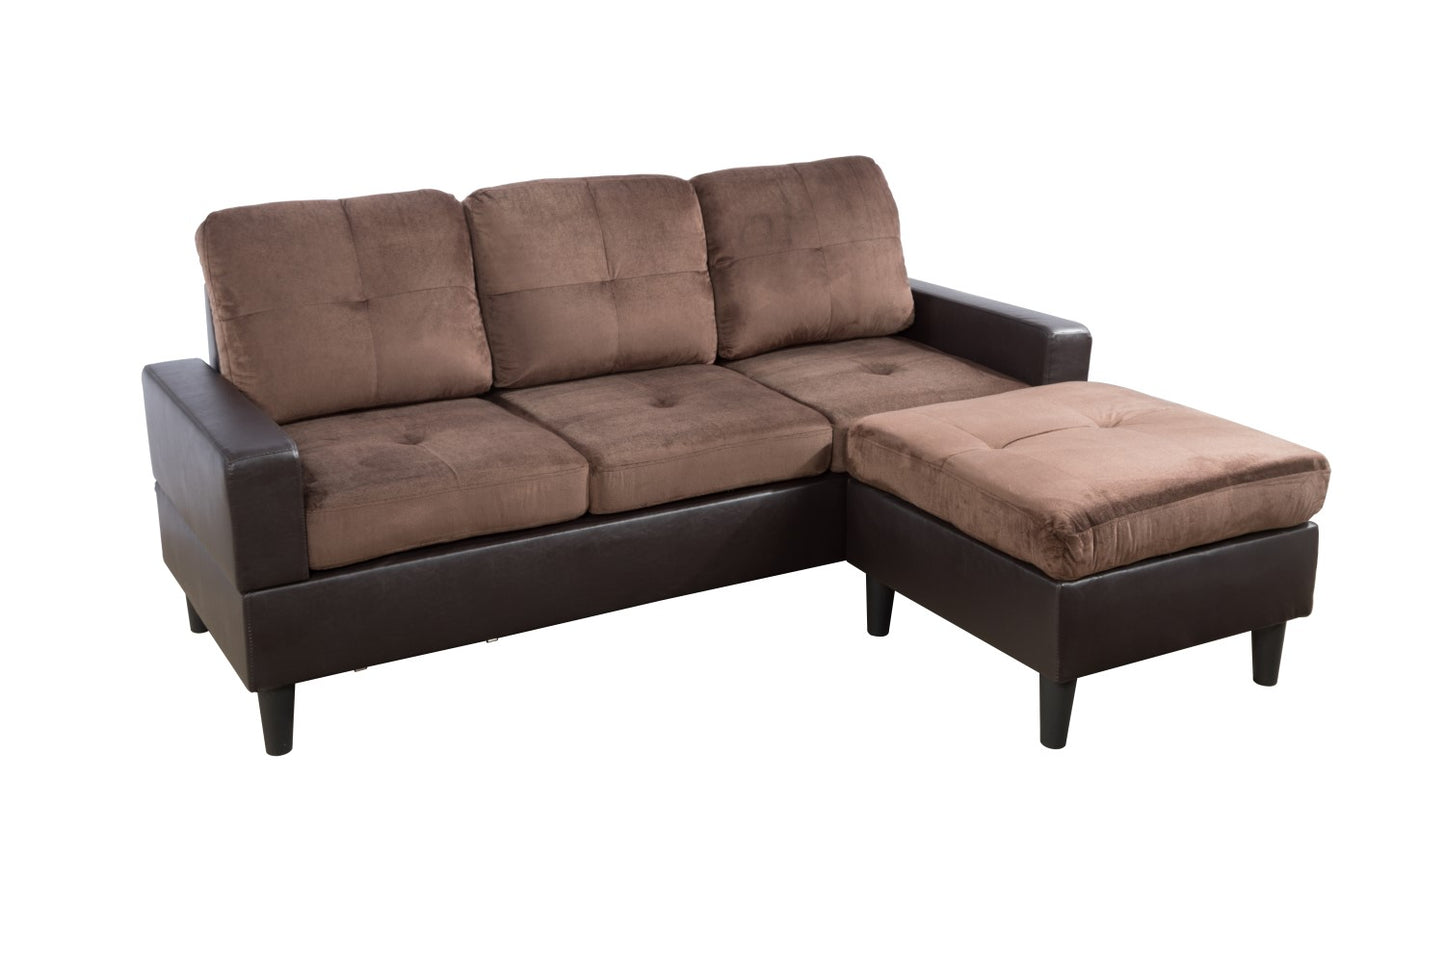 Forres Sofa Chaise Collection